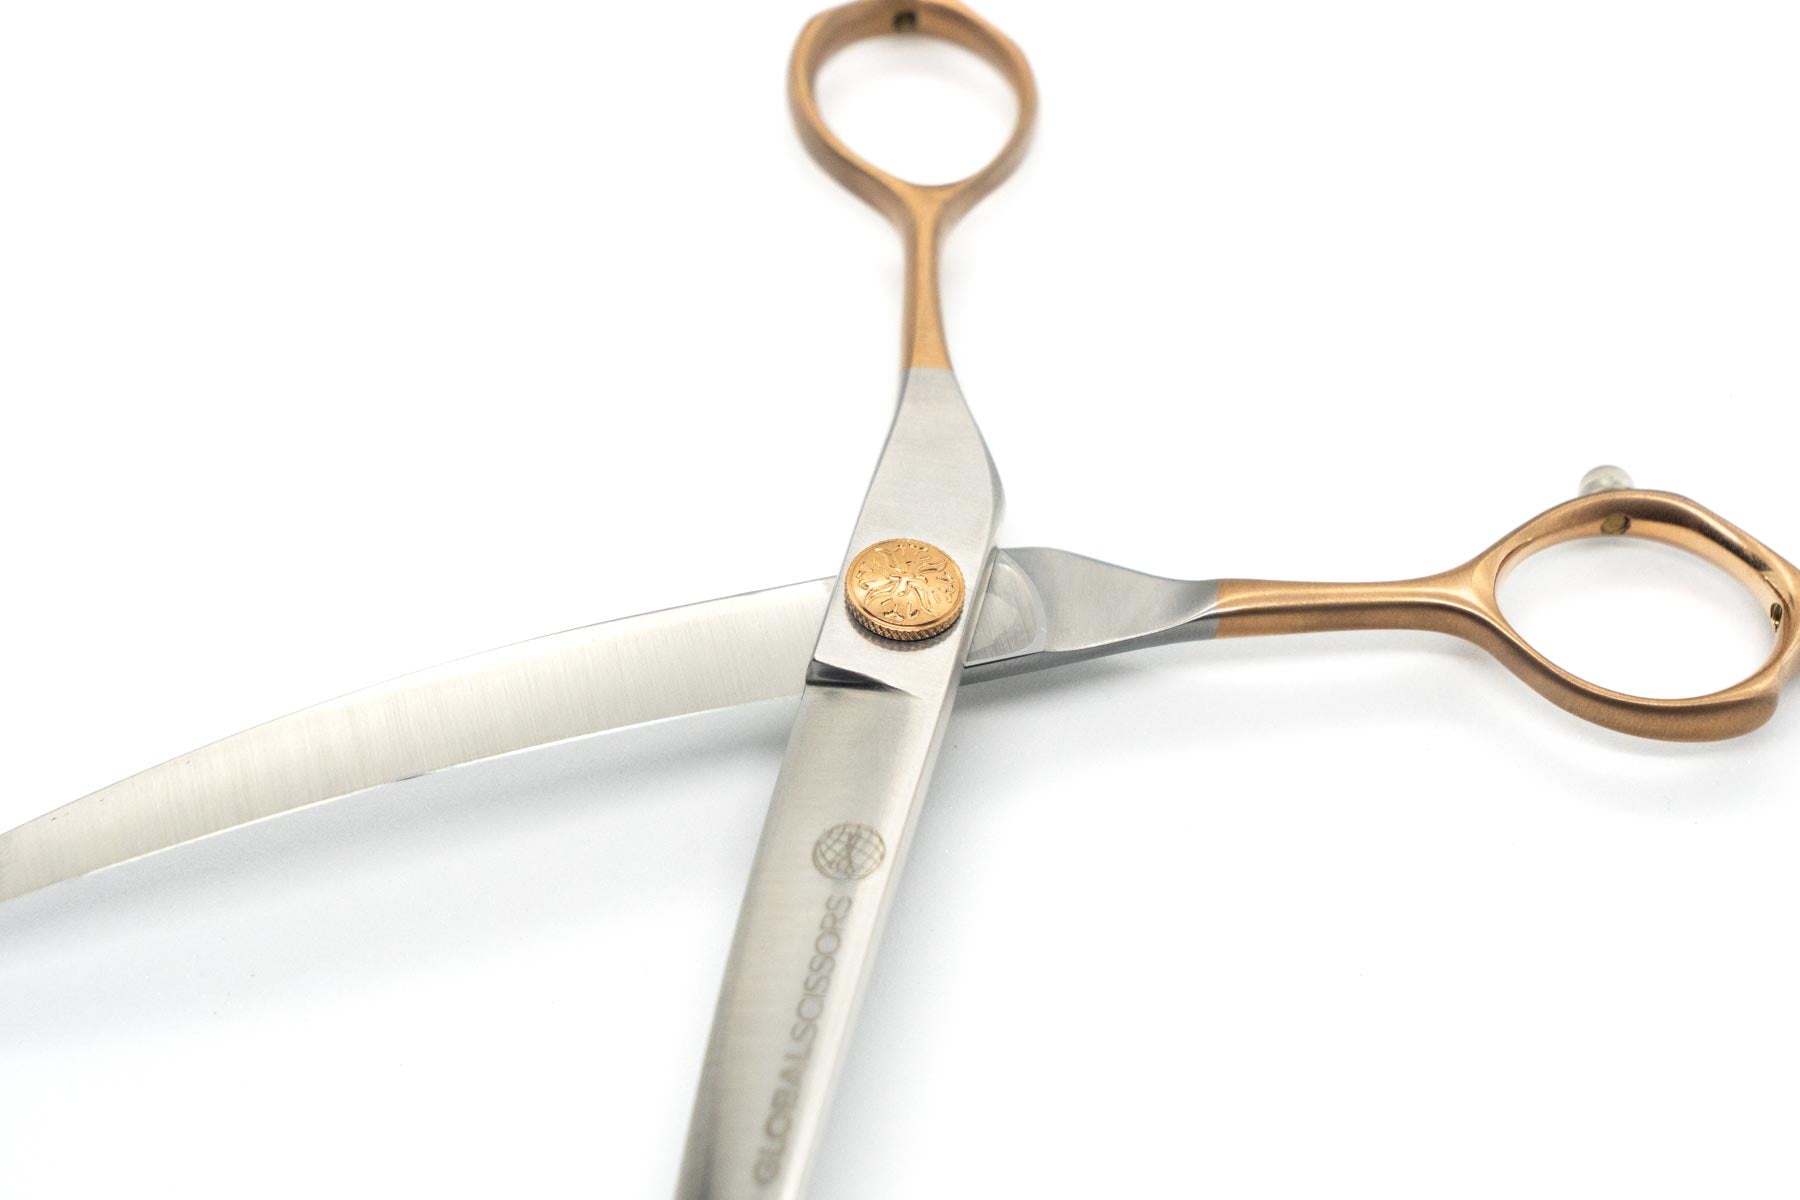 Aspen Light Rose Gold Pet Grooming 7.5 inch Cutting, Curved, Thinning & Chunker Scissor